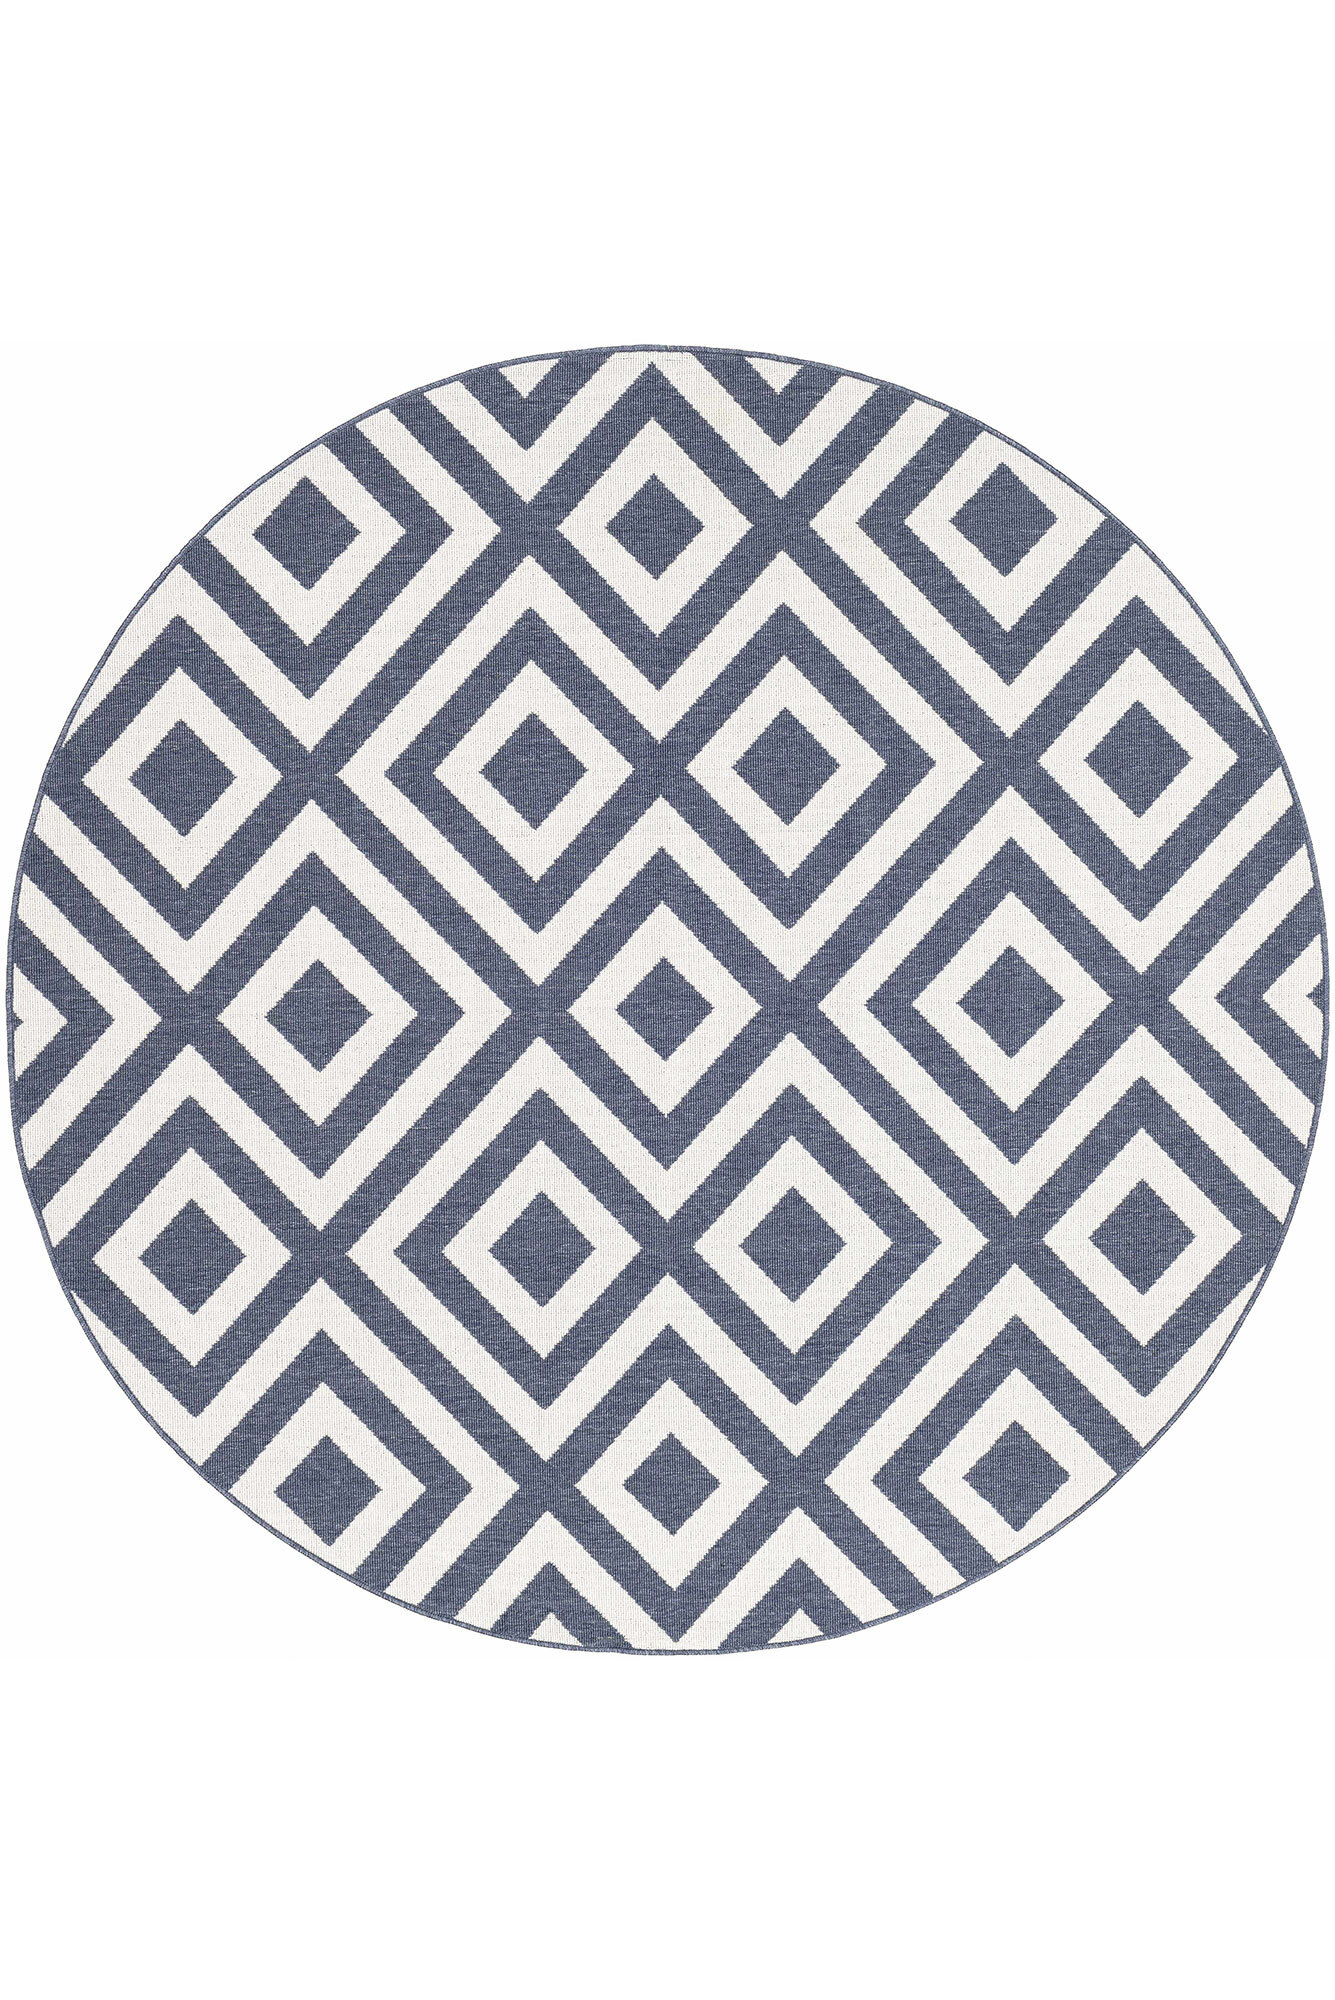 Ambient Round Rug AO1302-IE6X